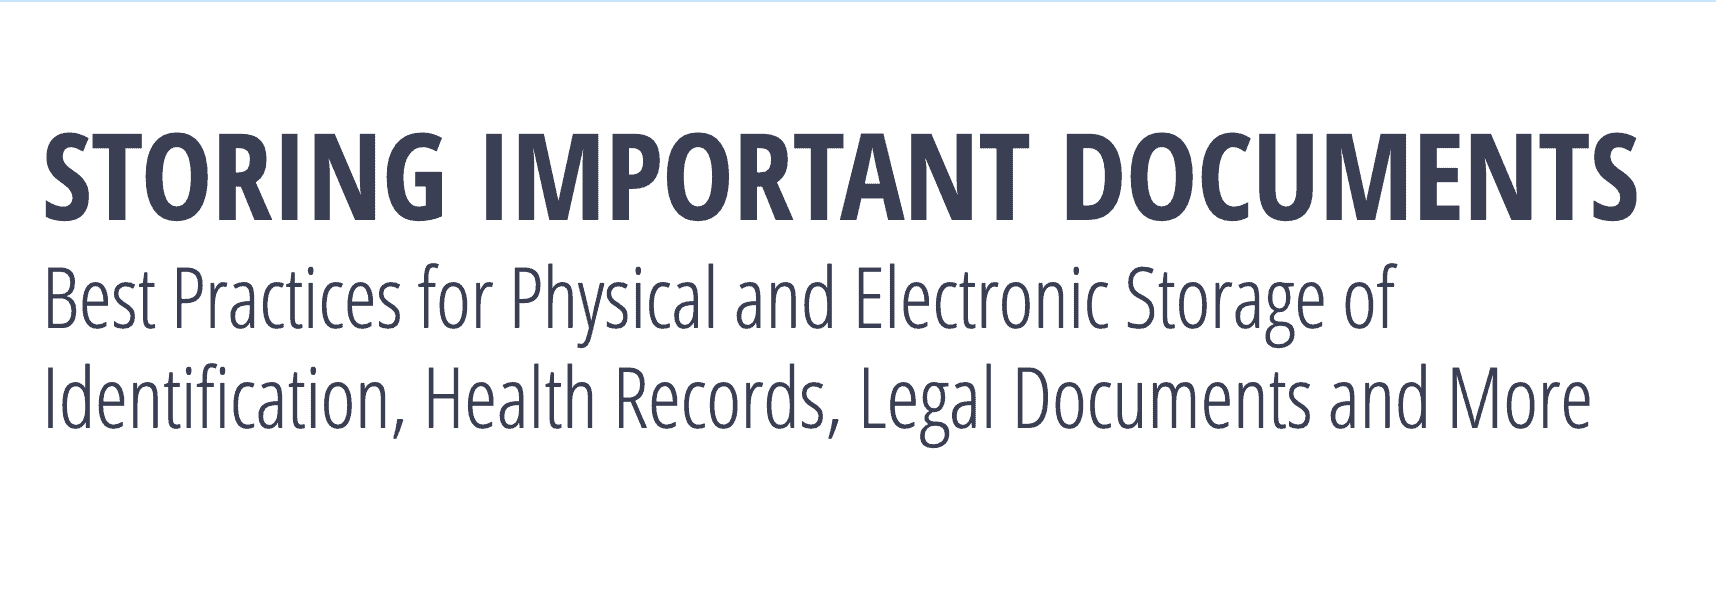 Storing Important Documents Featured Image